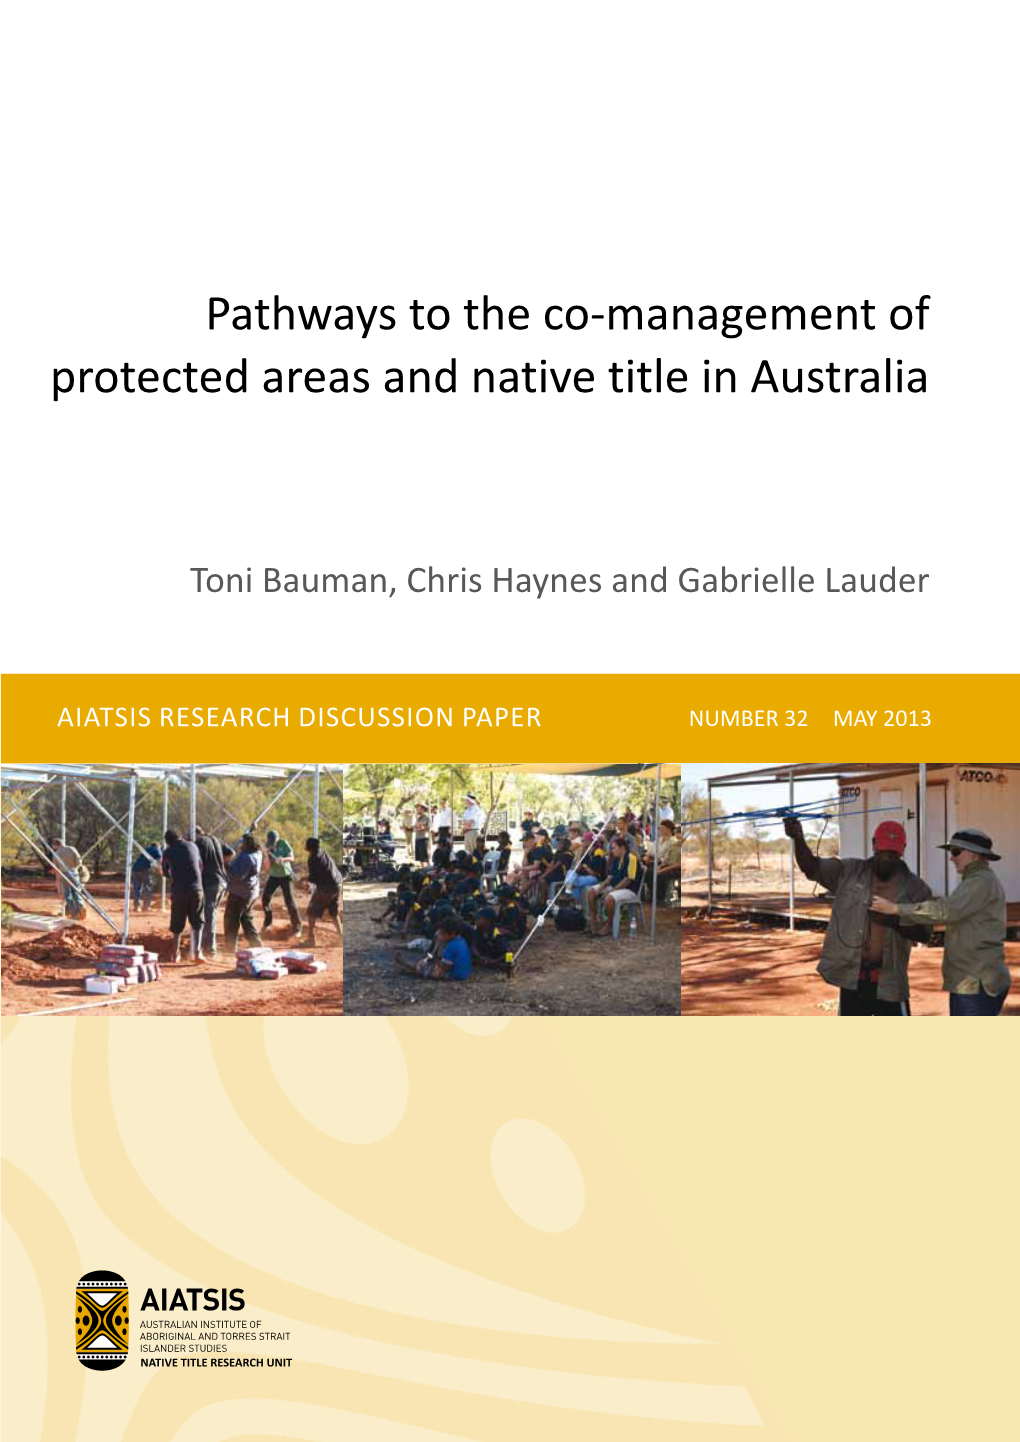 Pathways to the Co-Management of Protected Areas and Native Title in Australia